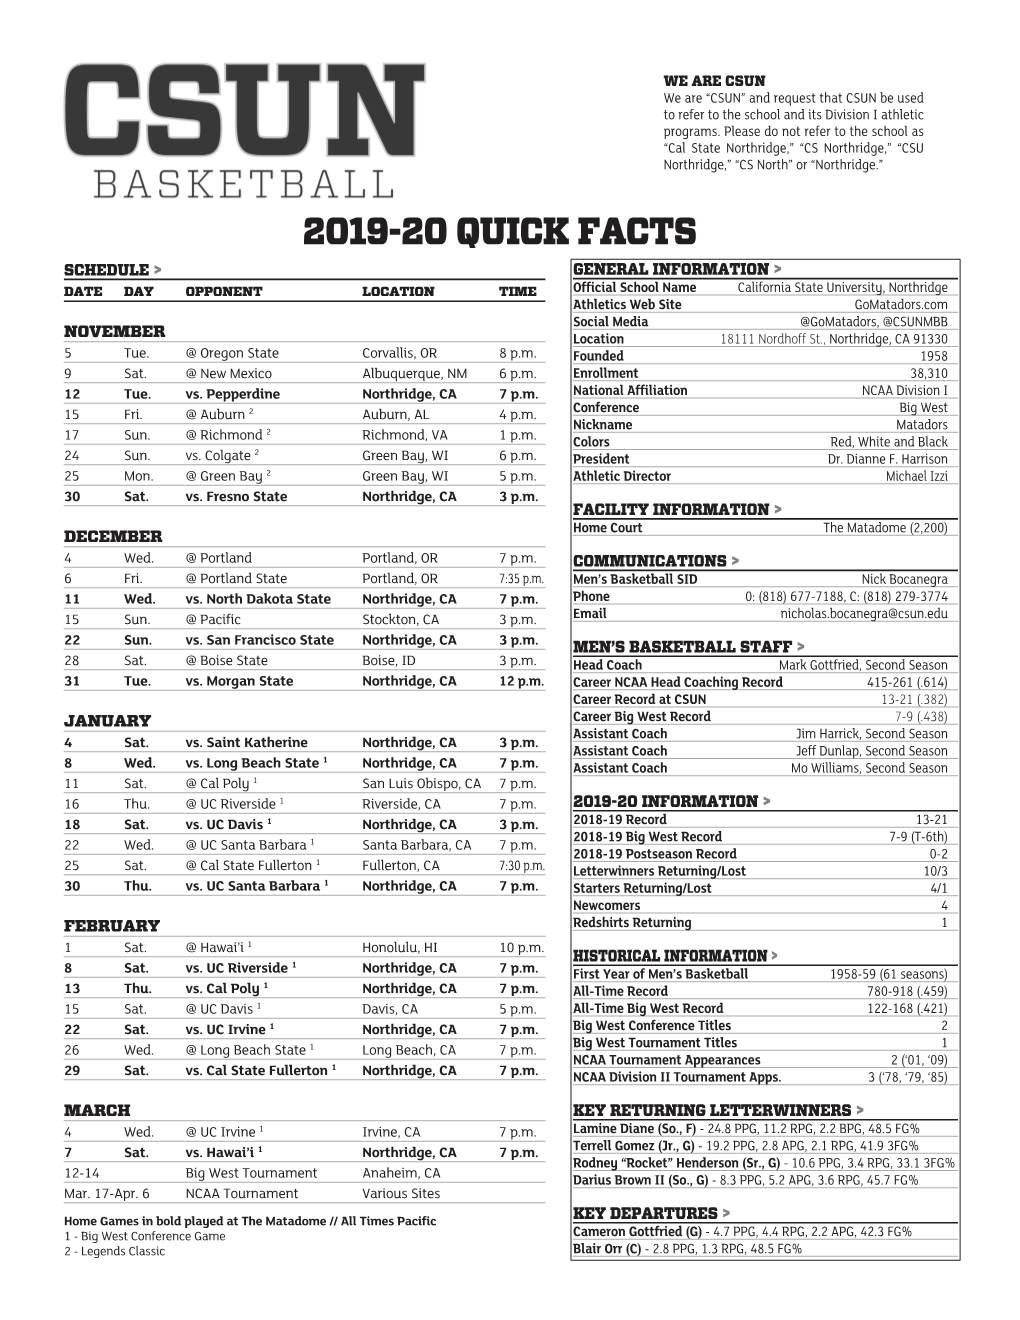 2019-20 Quick Facts